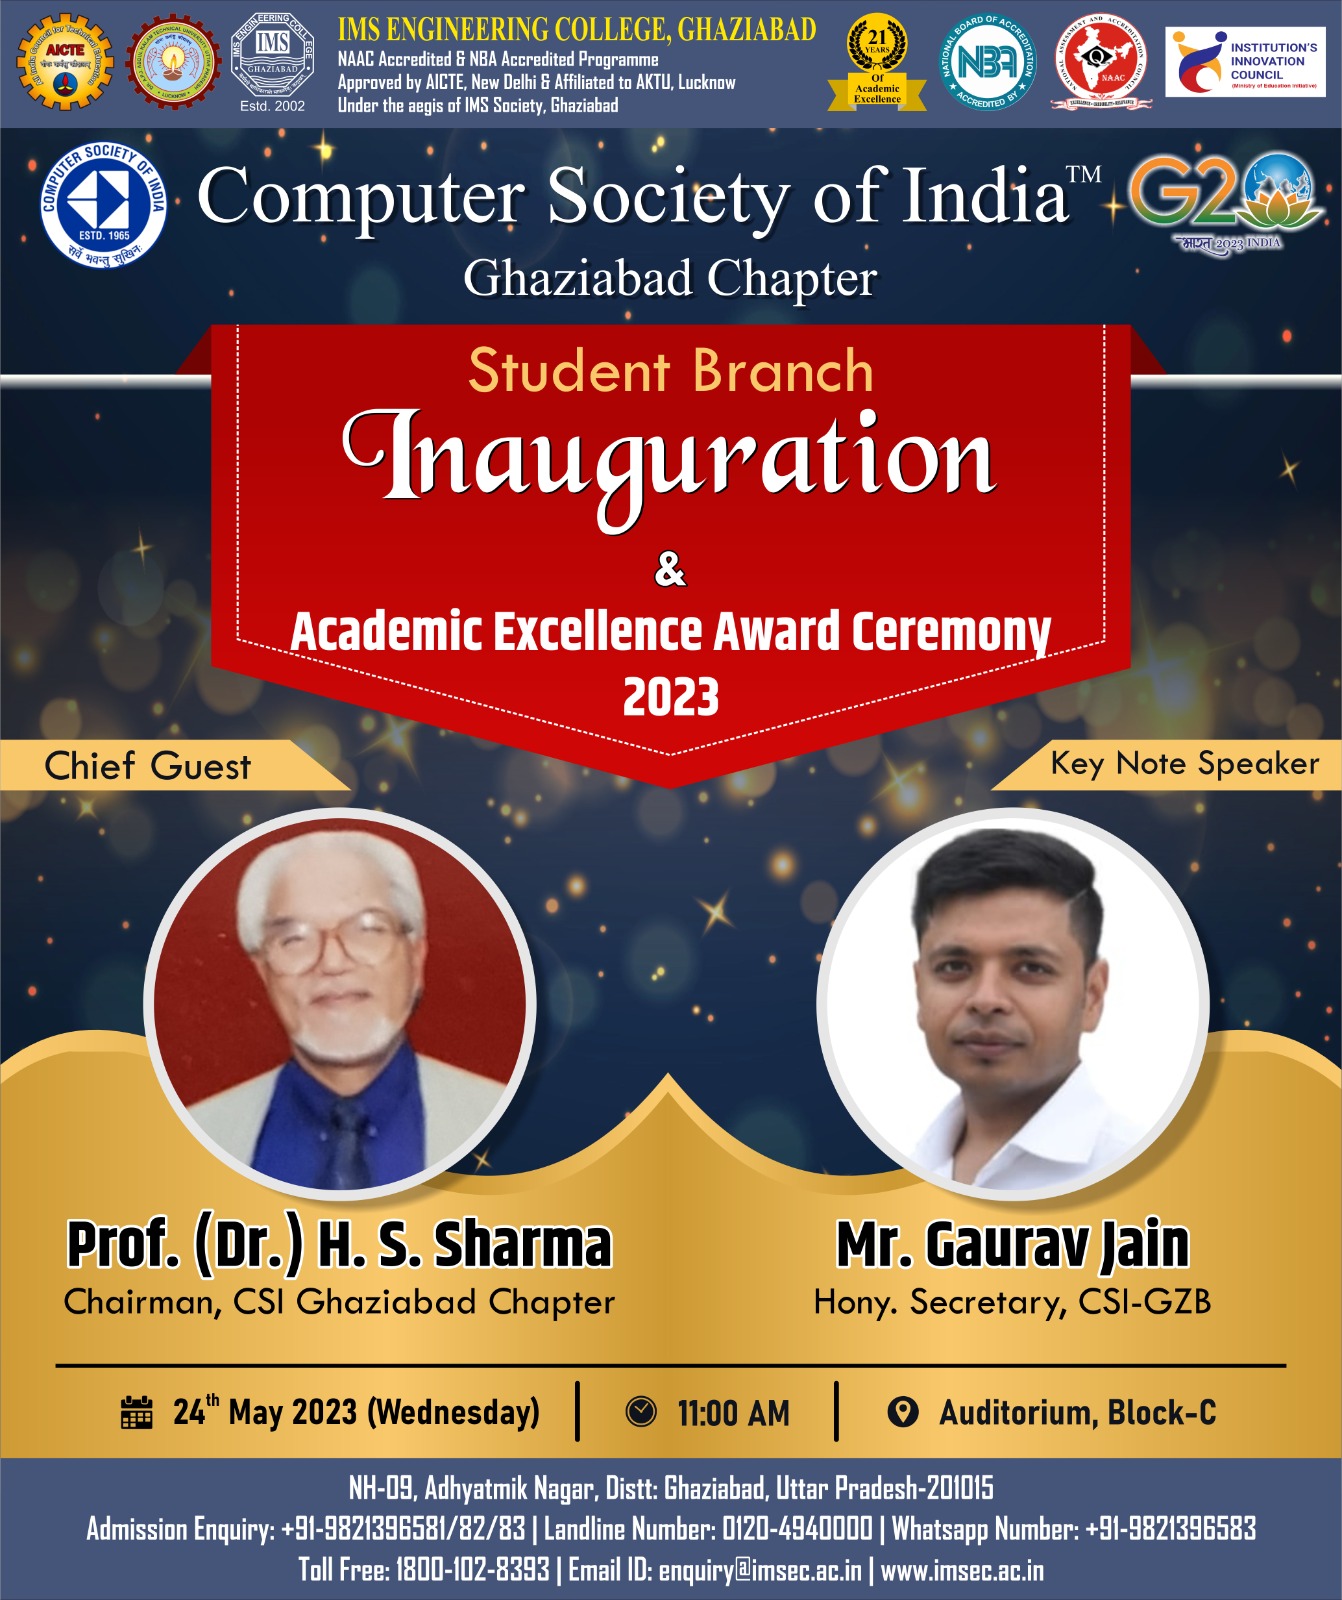 Student Branch of Computer Society of India ( Ghaziabad Chapter) will be inauguration & Certificate of Academic Excellence Award Ceremony 2023